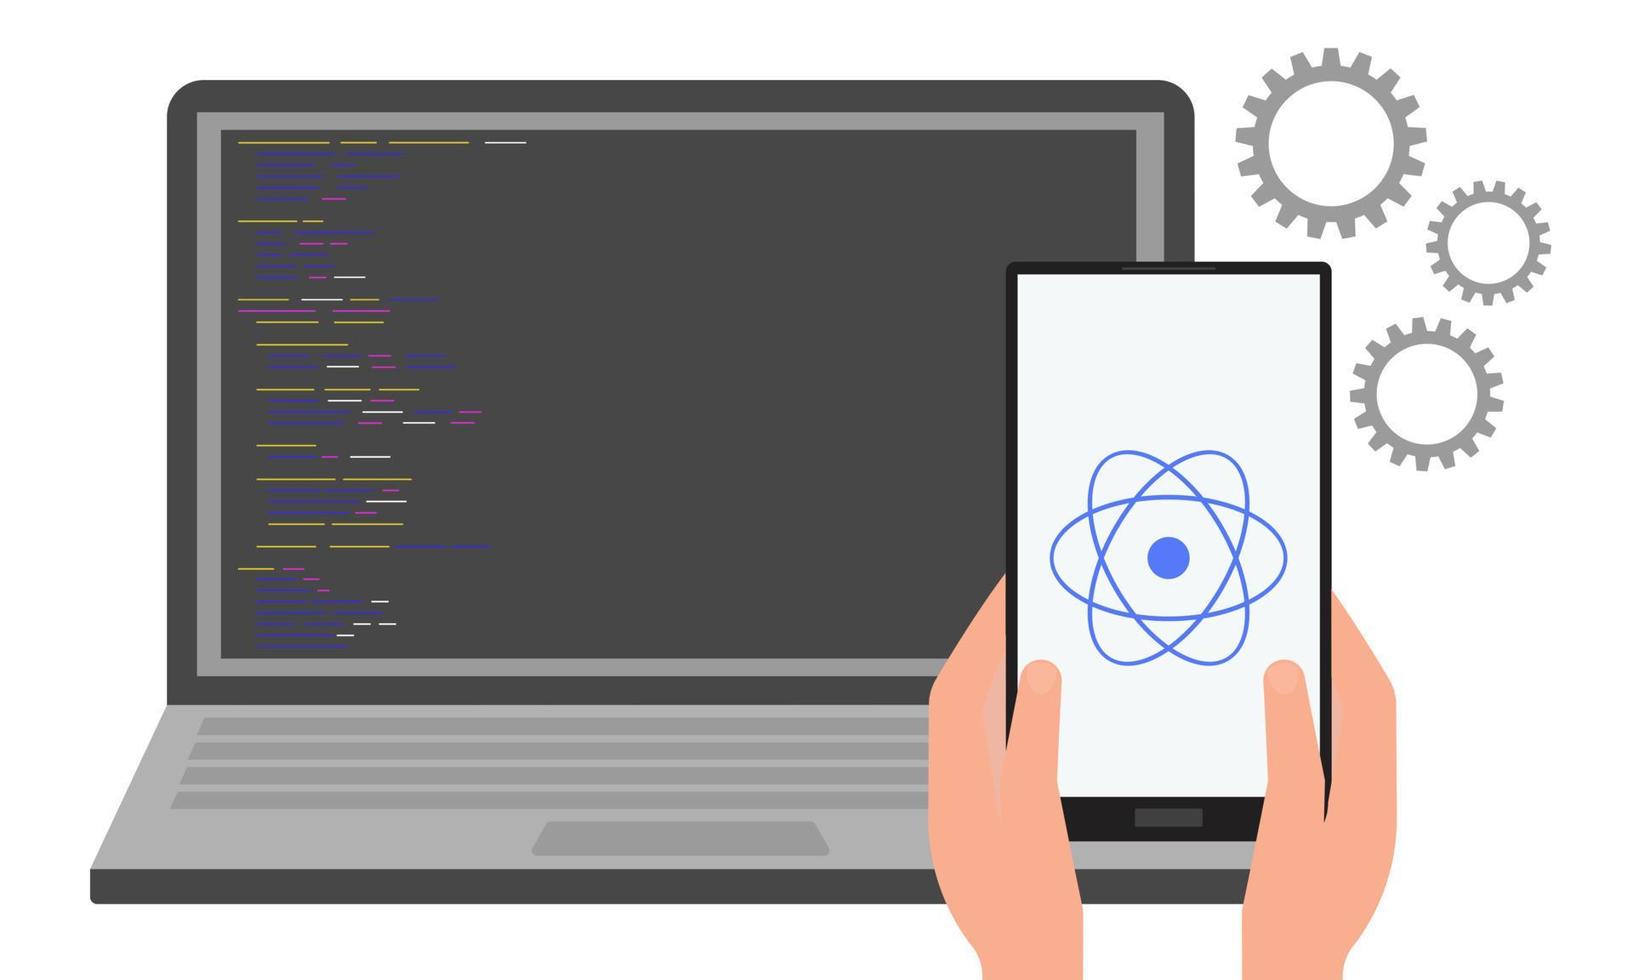 React native. Creation of cross-platform programs and applications. Concept. Vector illustration